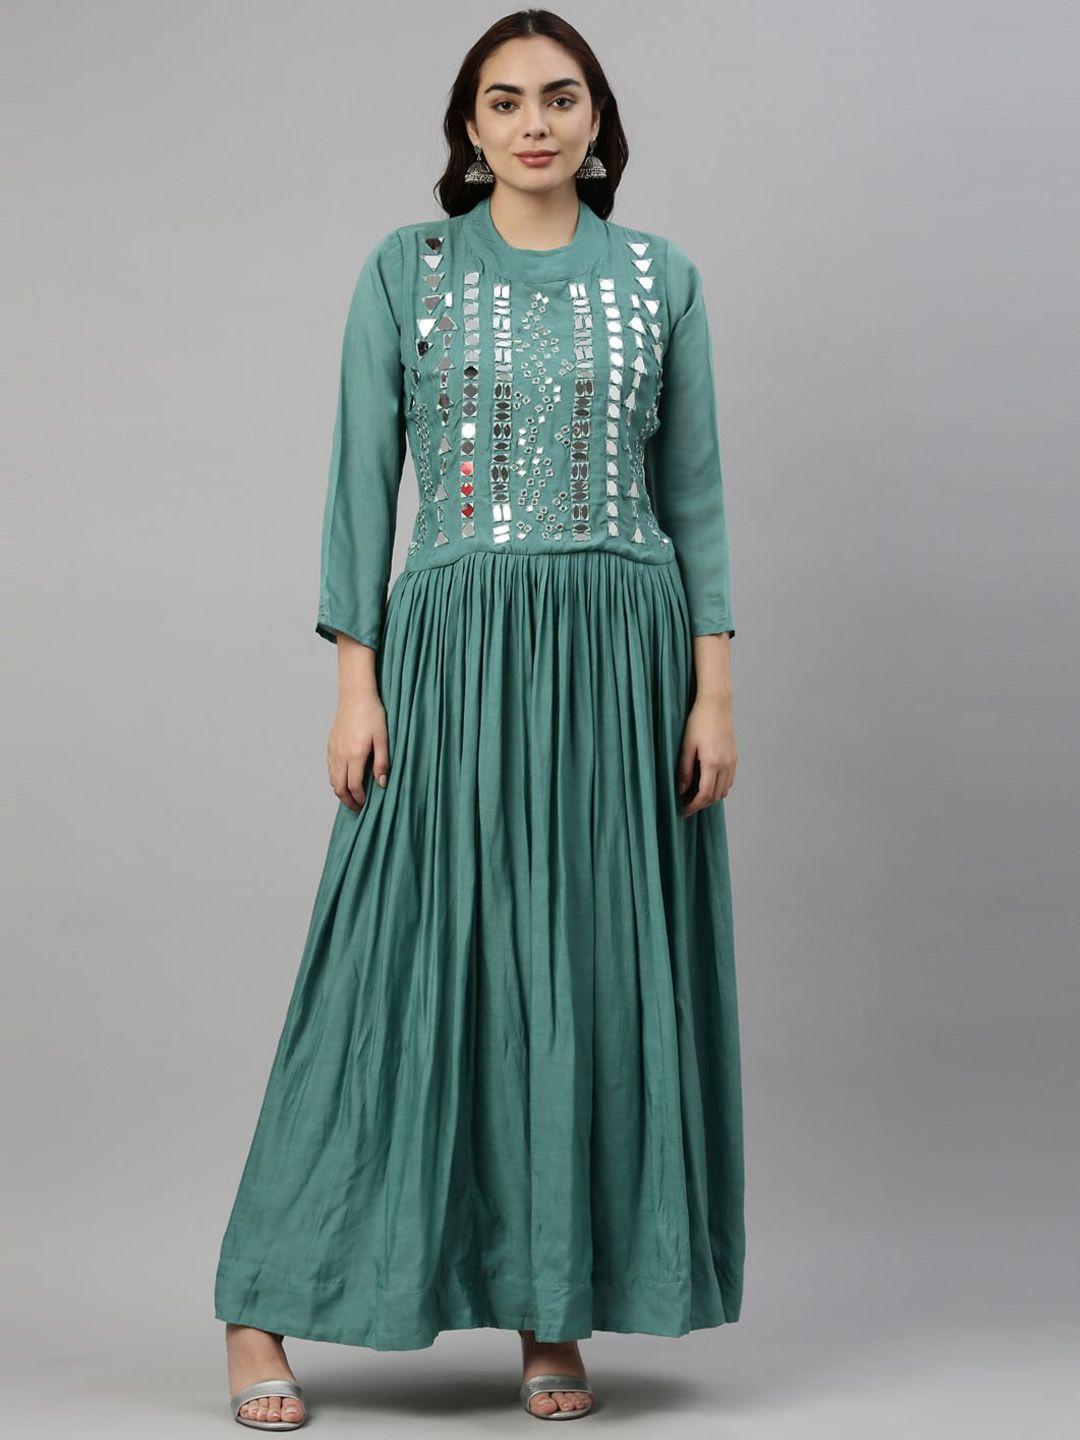 neerus teal green floral embroidered ethnic maxi dress